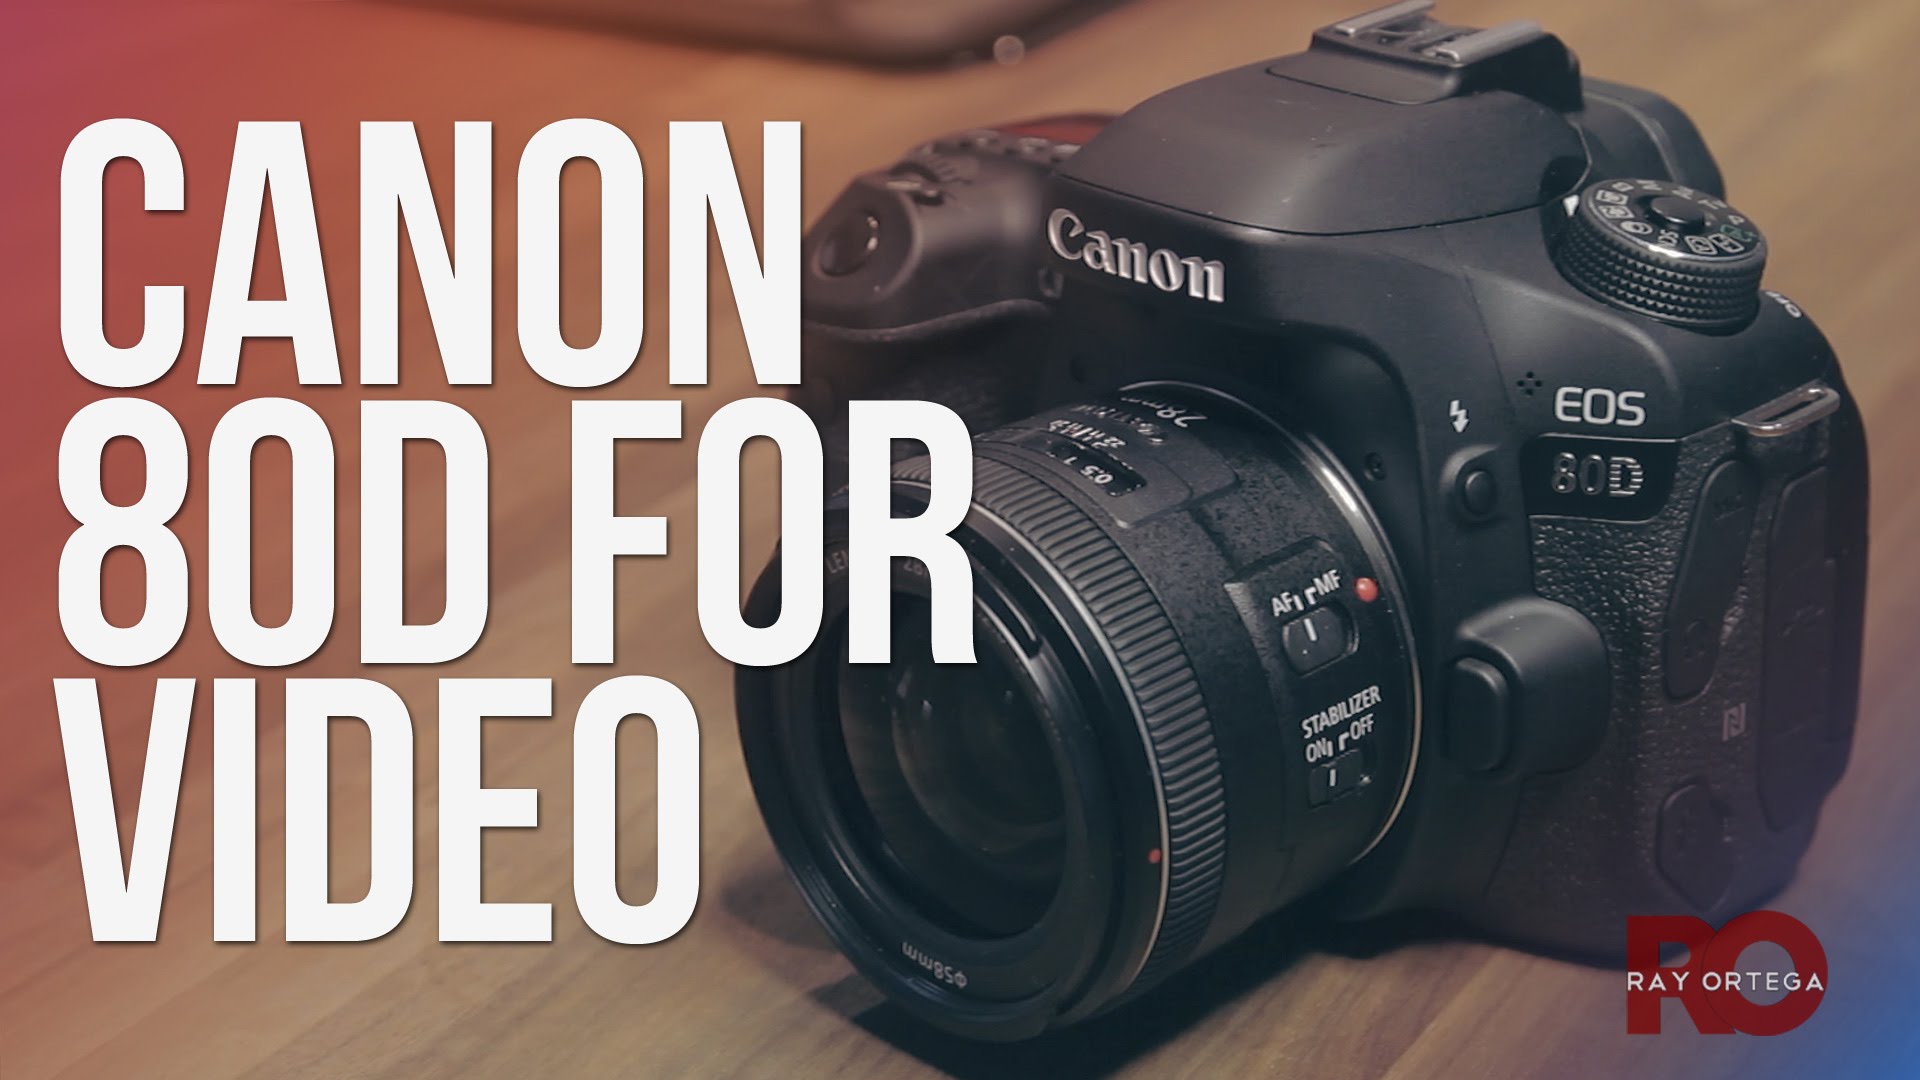 Canon 80D for Video